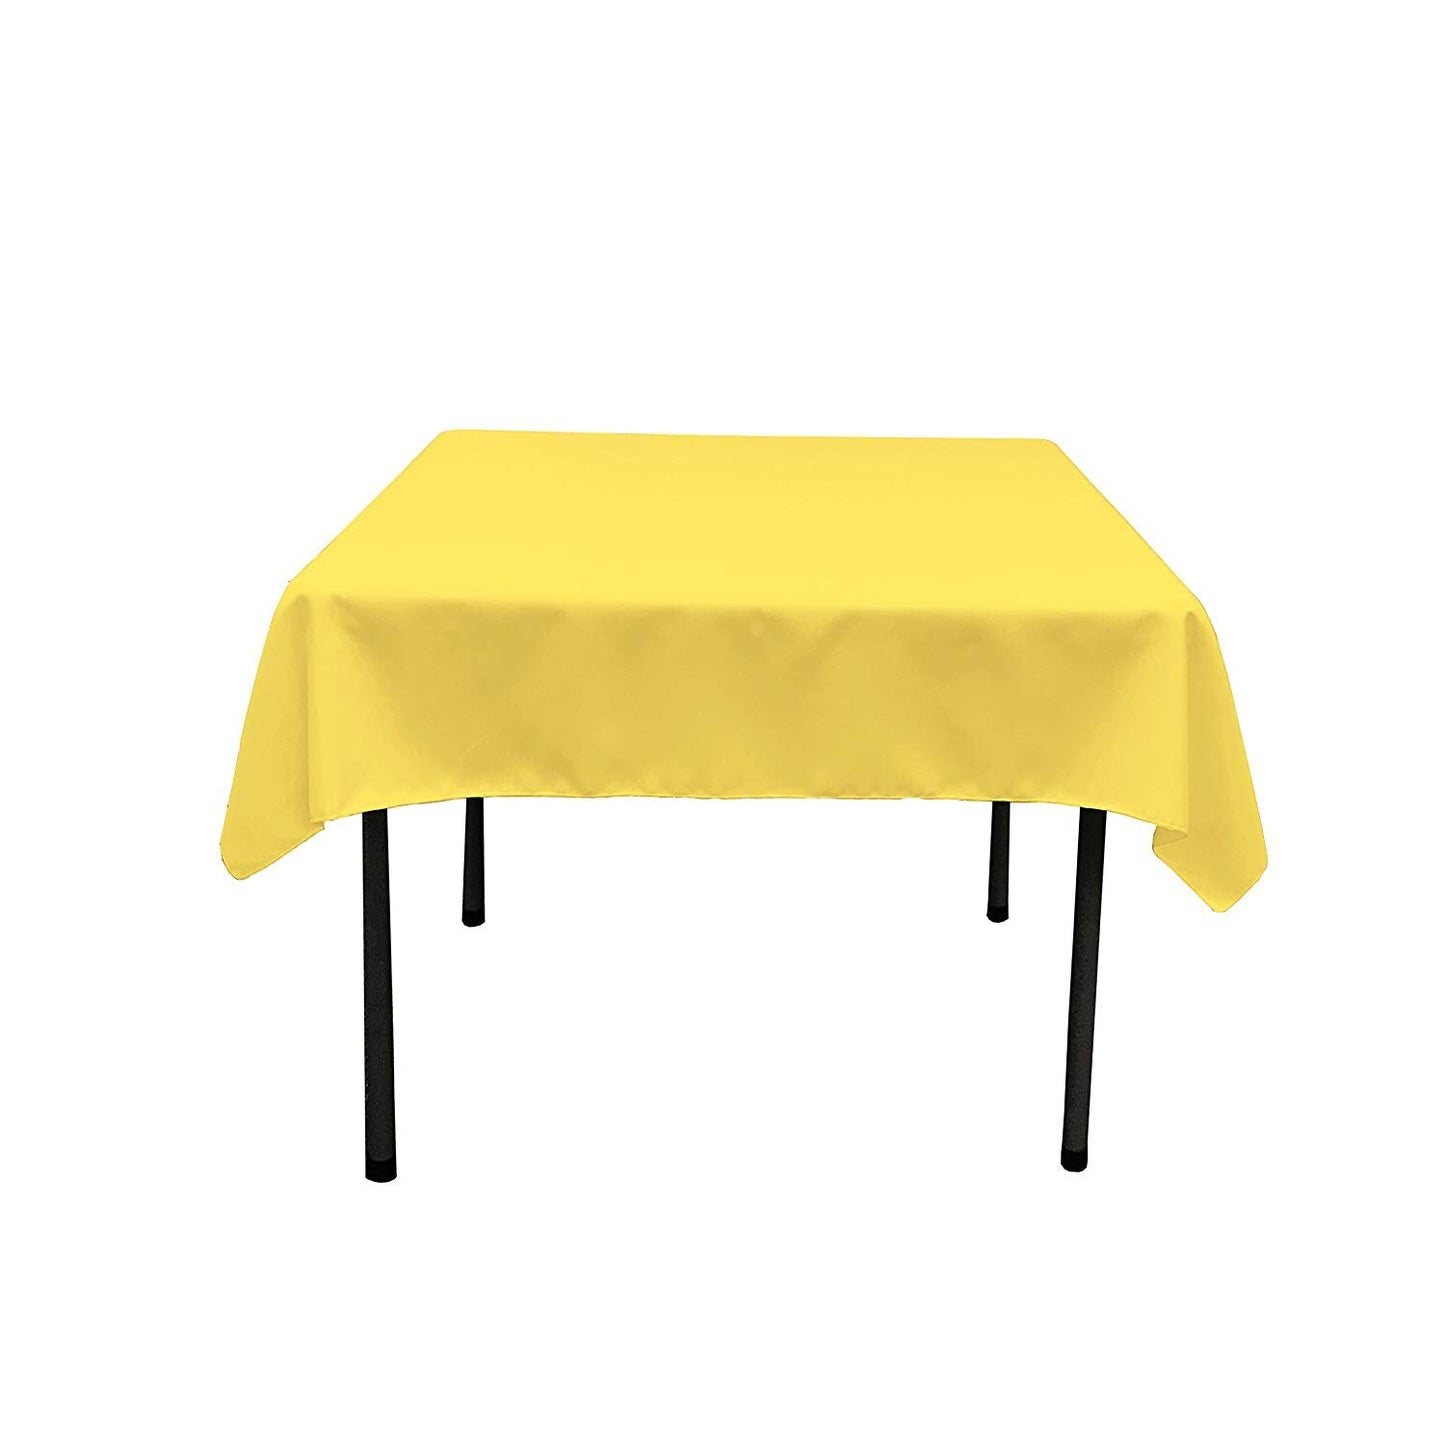 54 x 54-Inch Seamless Light Yellow Rectangular Polyester Tablecloth for Wedding Party Decorations Square Table Cloth Cover